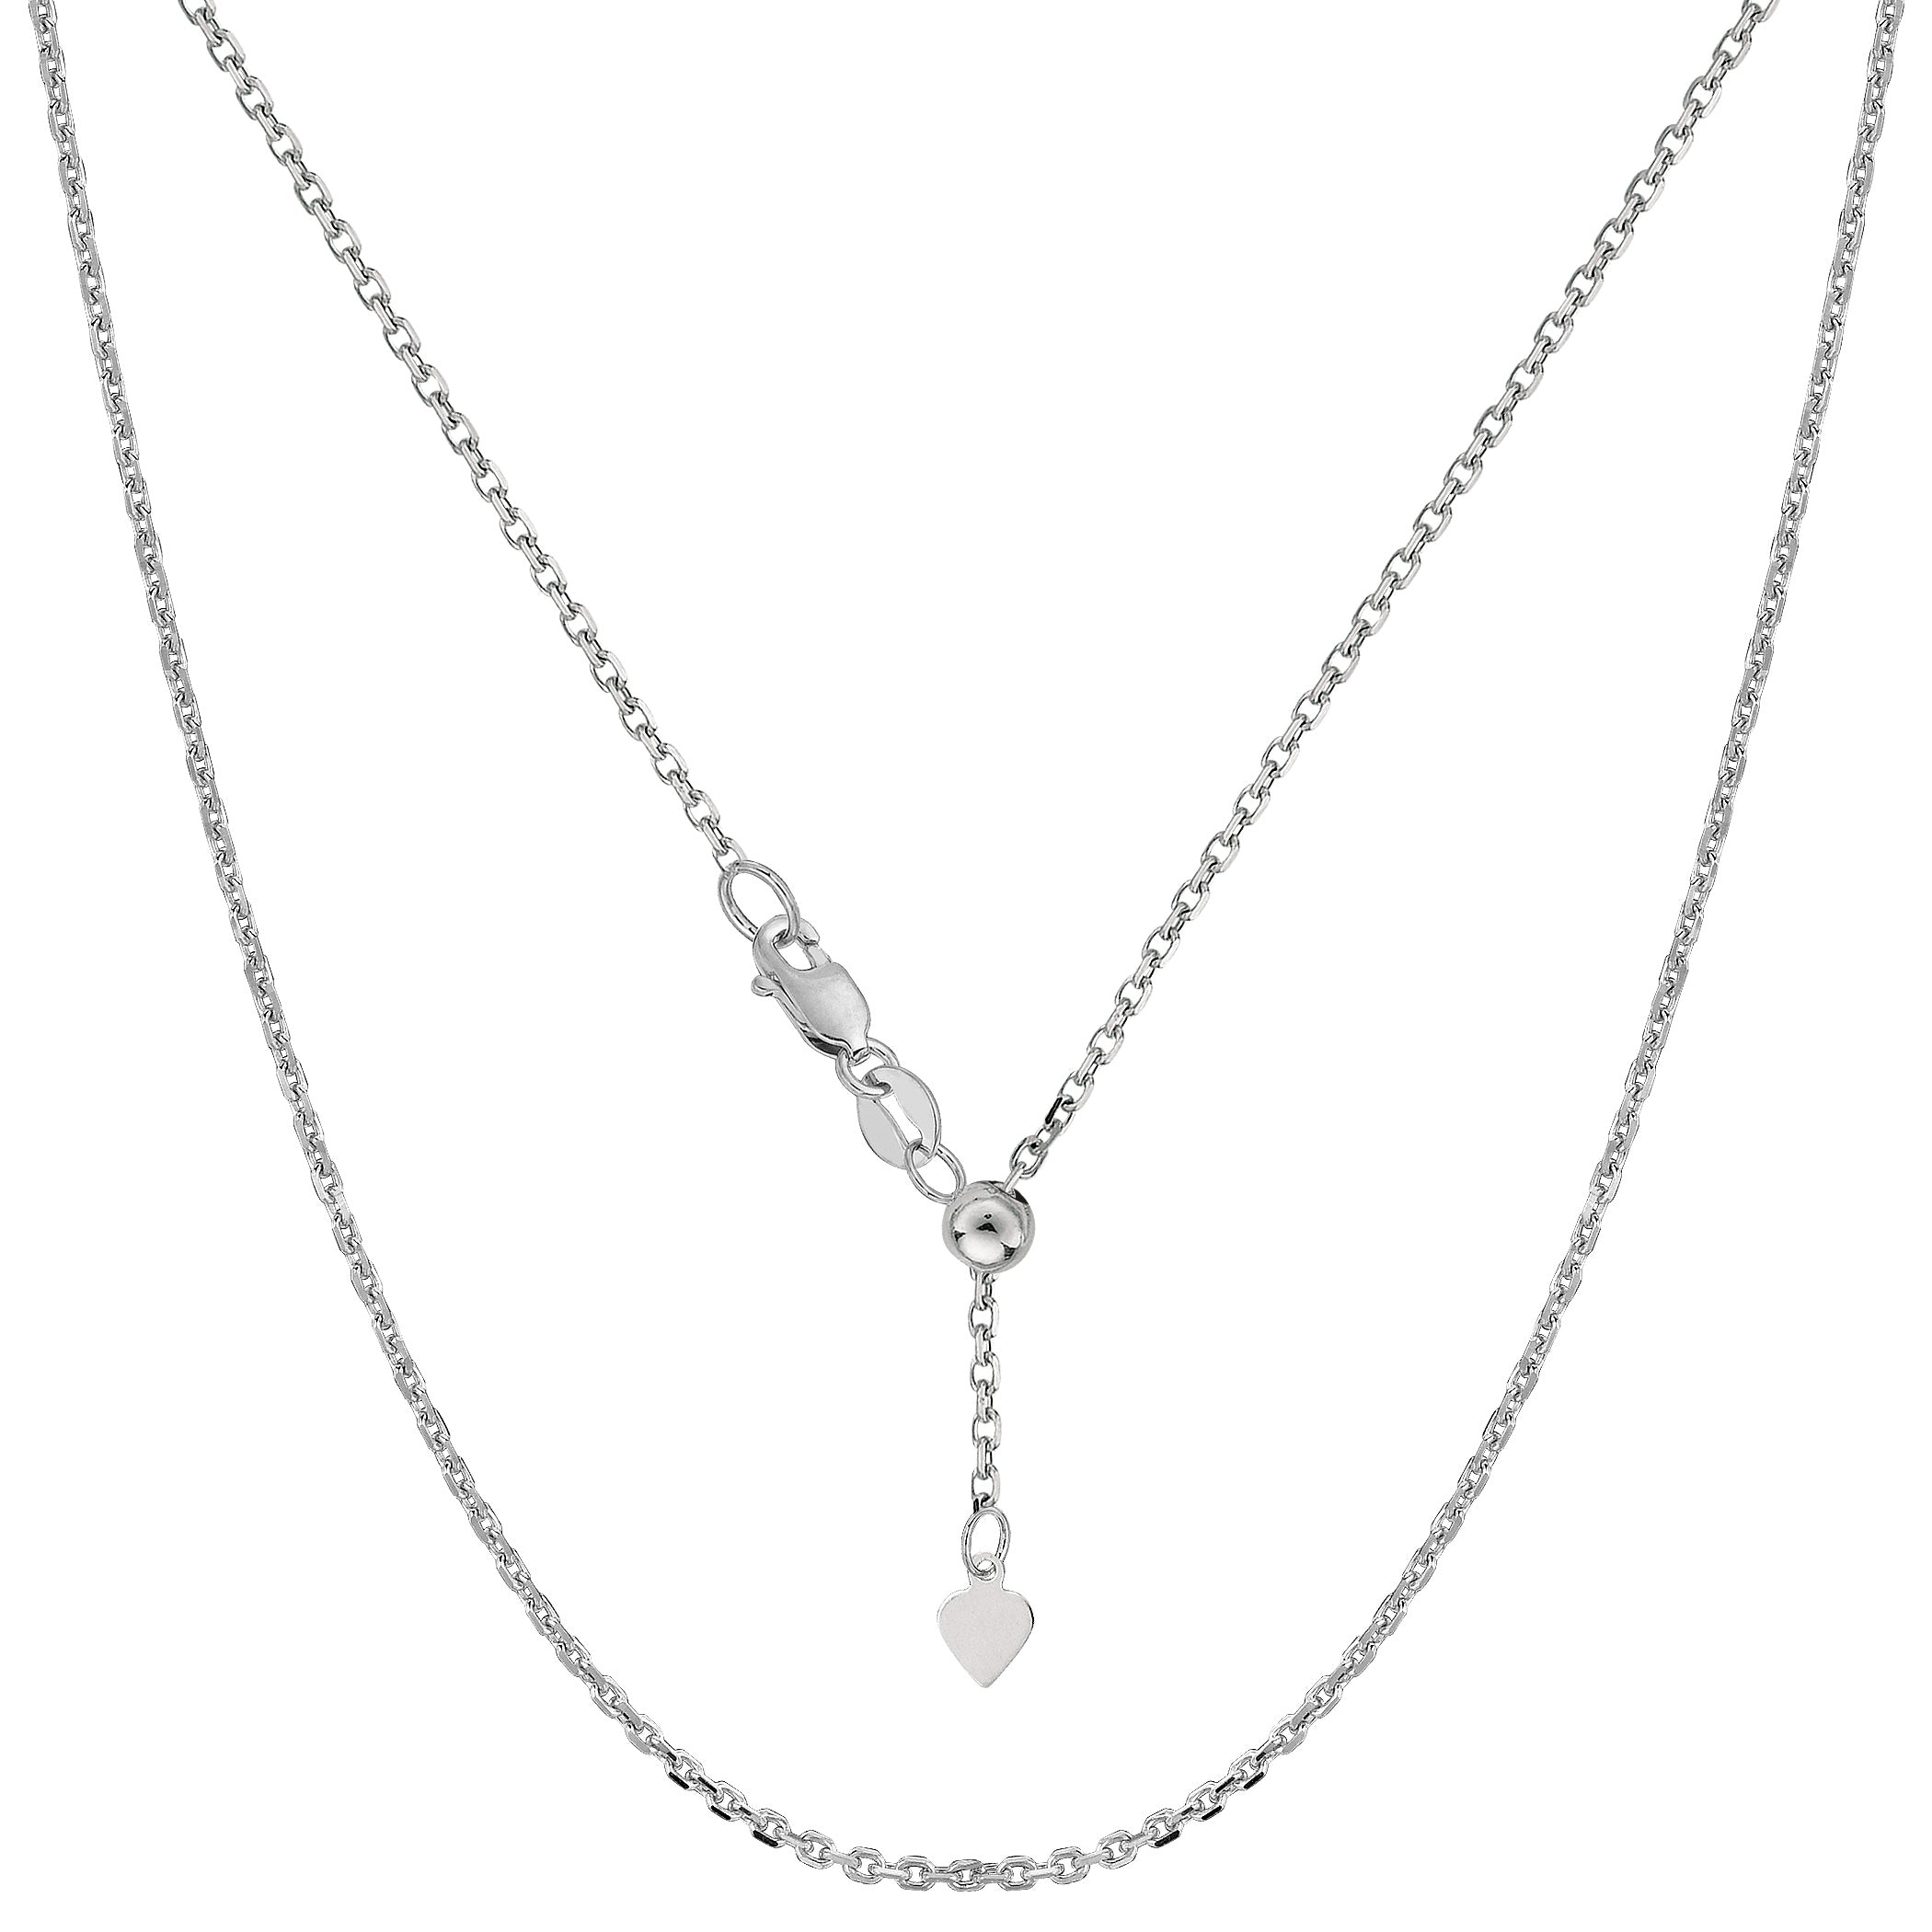 Sterling Silver Rhodium Plated 22" Sliding Adjustable Cable Chain Necklace, 1.5mm fine designer jewelry for men and women